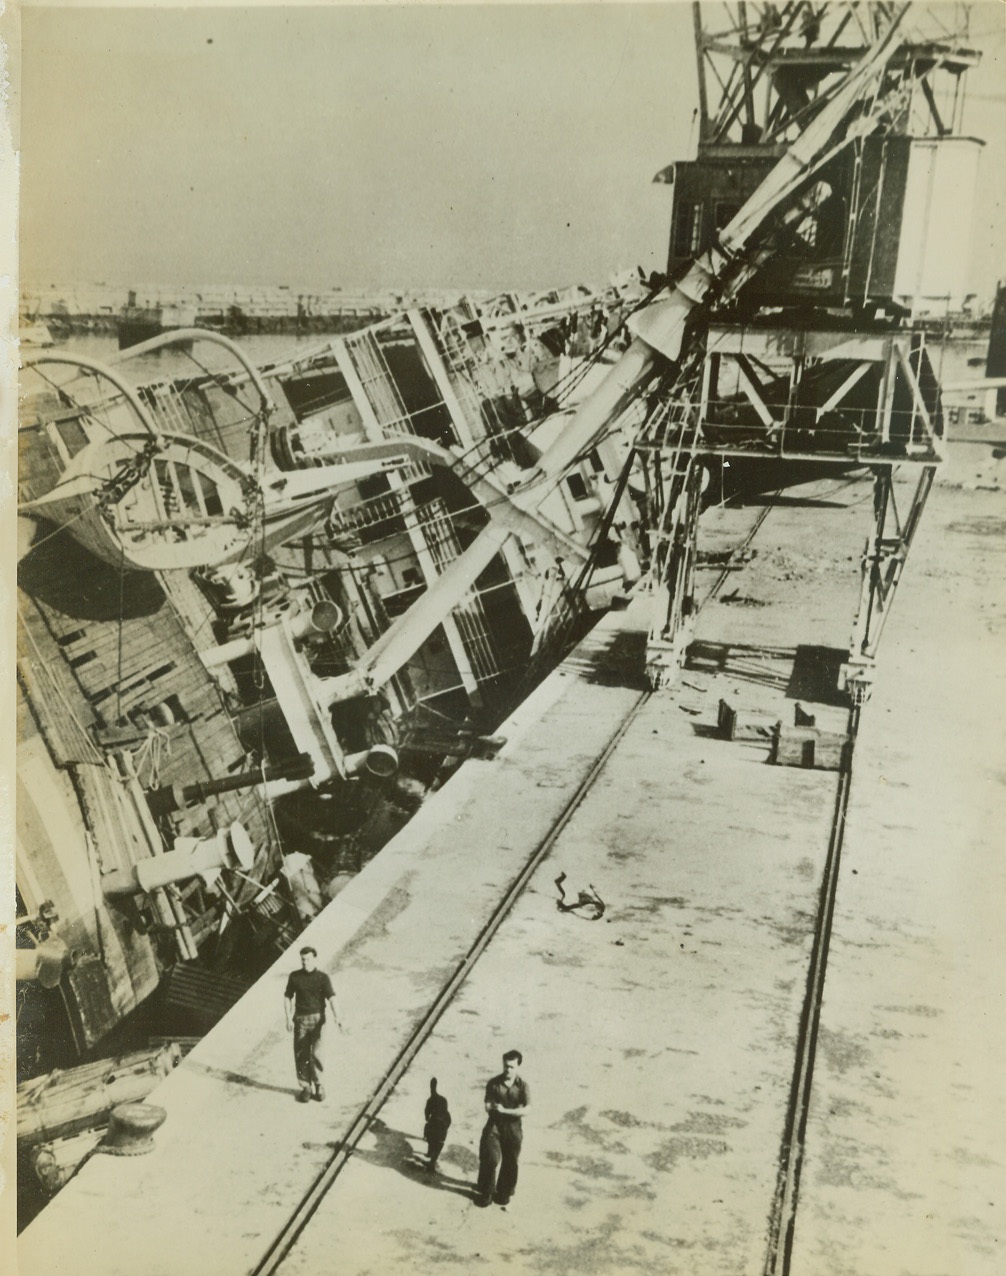 ON HER SIDE, 11/25/1942. MOROCCO – A capsized merchantman careens against the quay in Casablanca harbor after defenders of the seaport were defeated by American forces. Latest dispatches from the North American front indicate progress in the British drive on Bizerte and Tunis. Credit: ACME;